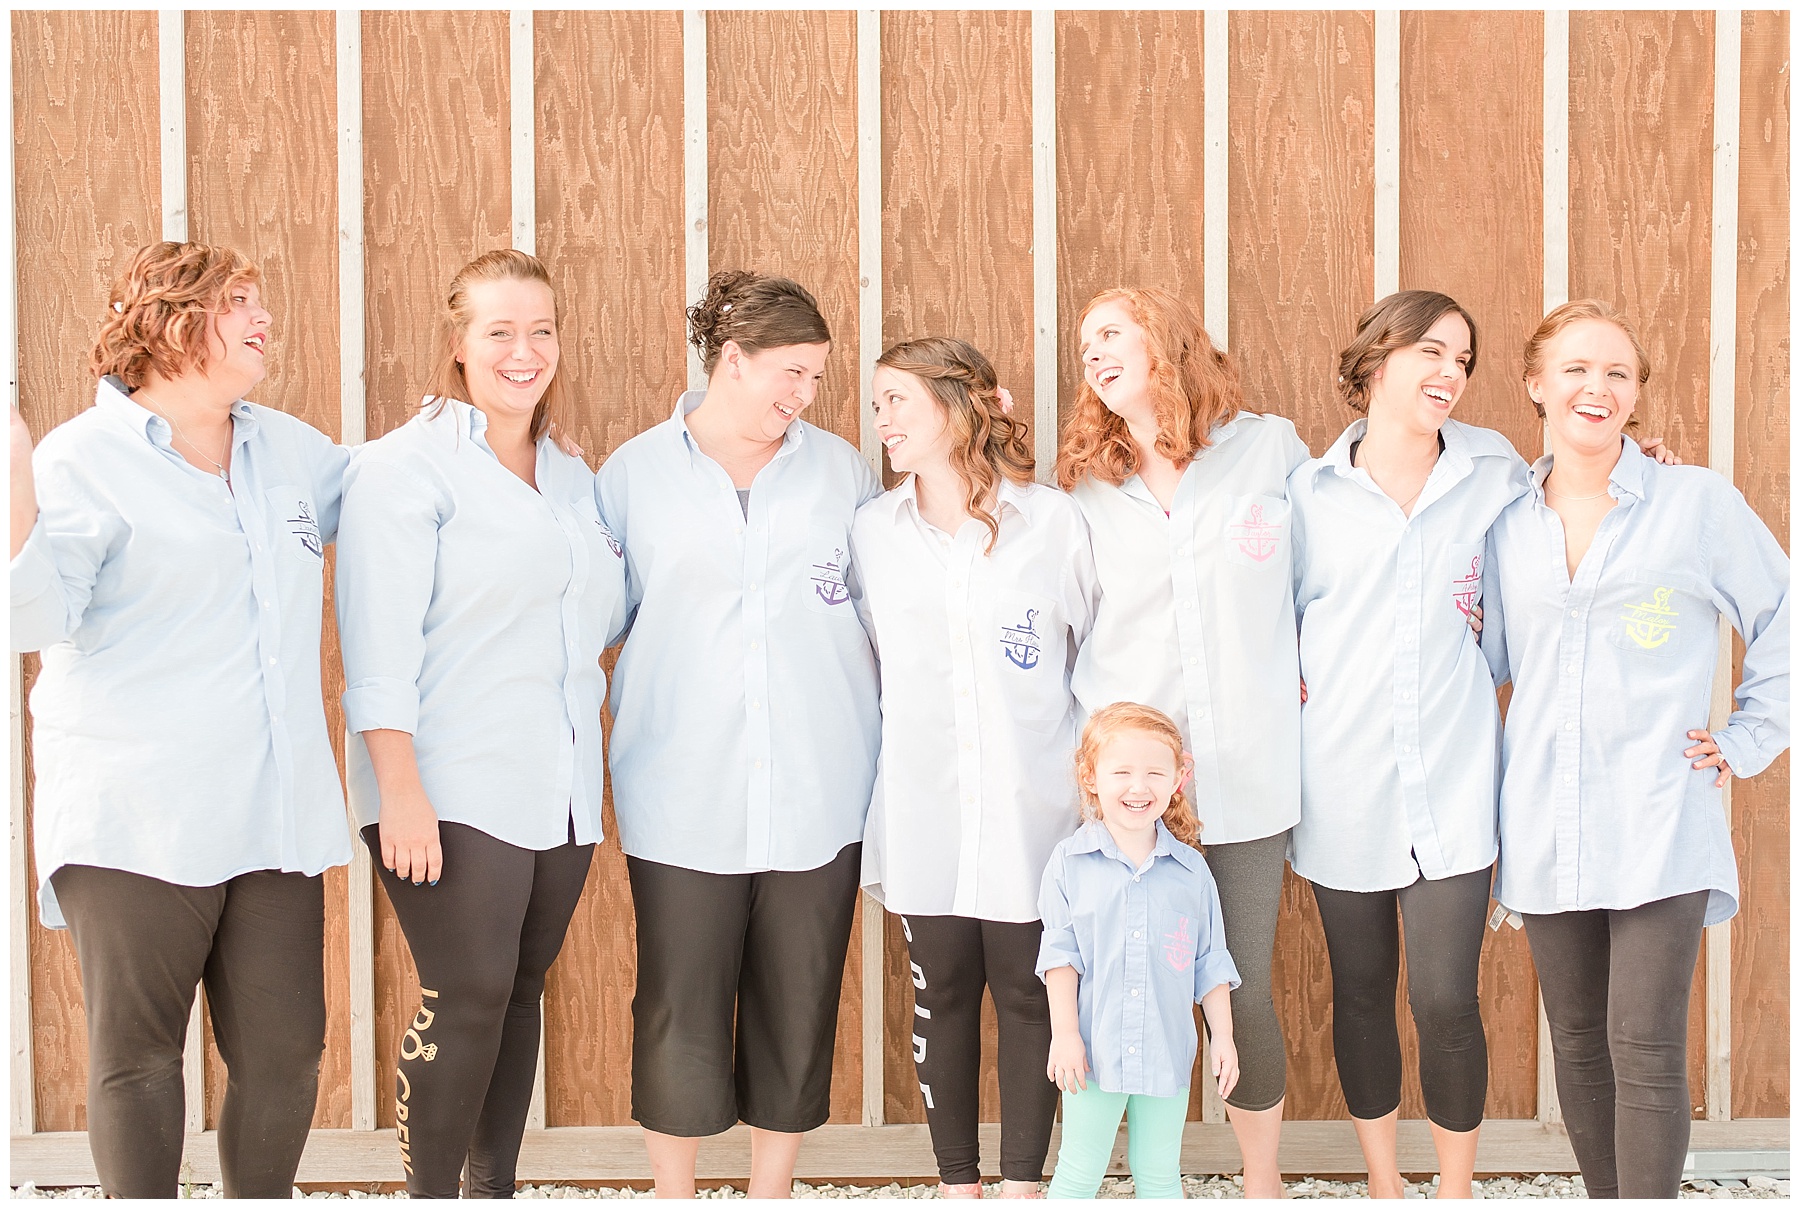 Bride and bridesmaids laughing in matching wedding shirts in 2018 wedding photography favorites